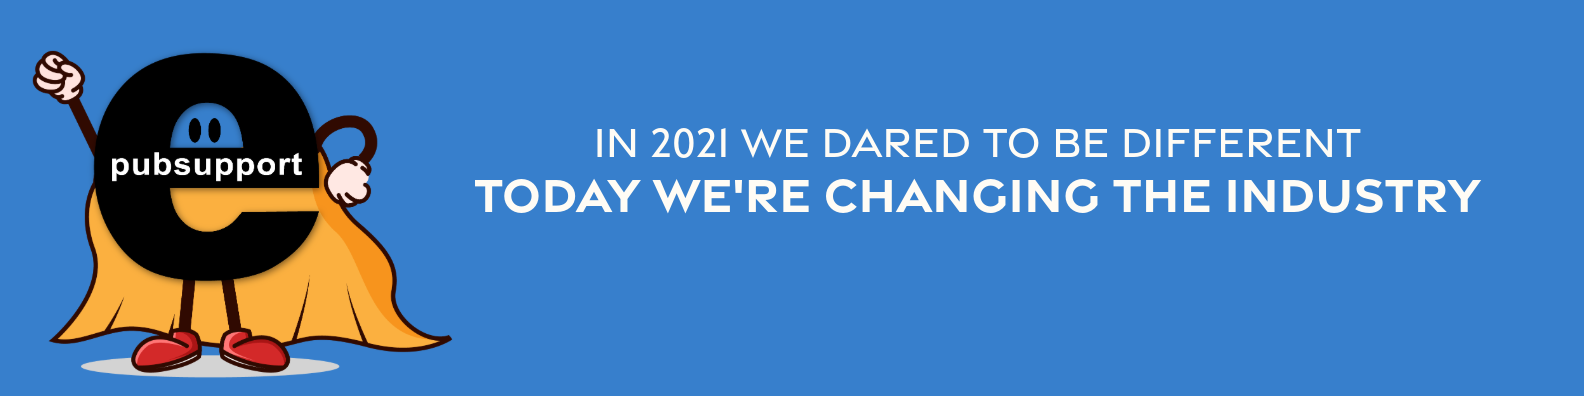 Header image describing, in 2021 we dare to be different. Today, we're changing the industry.